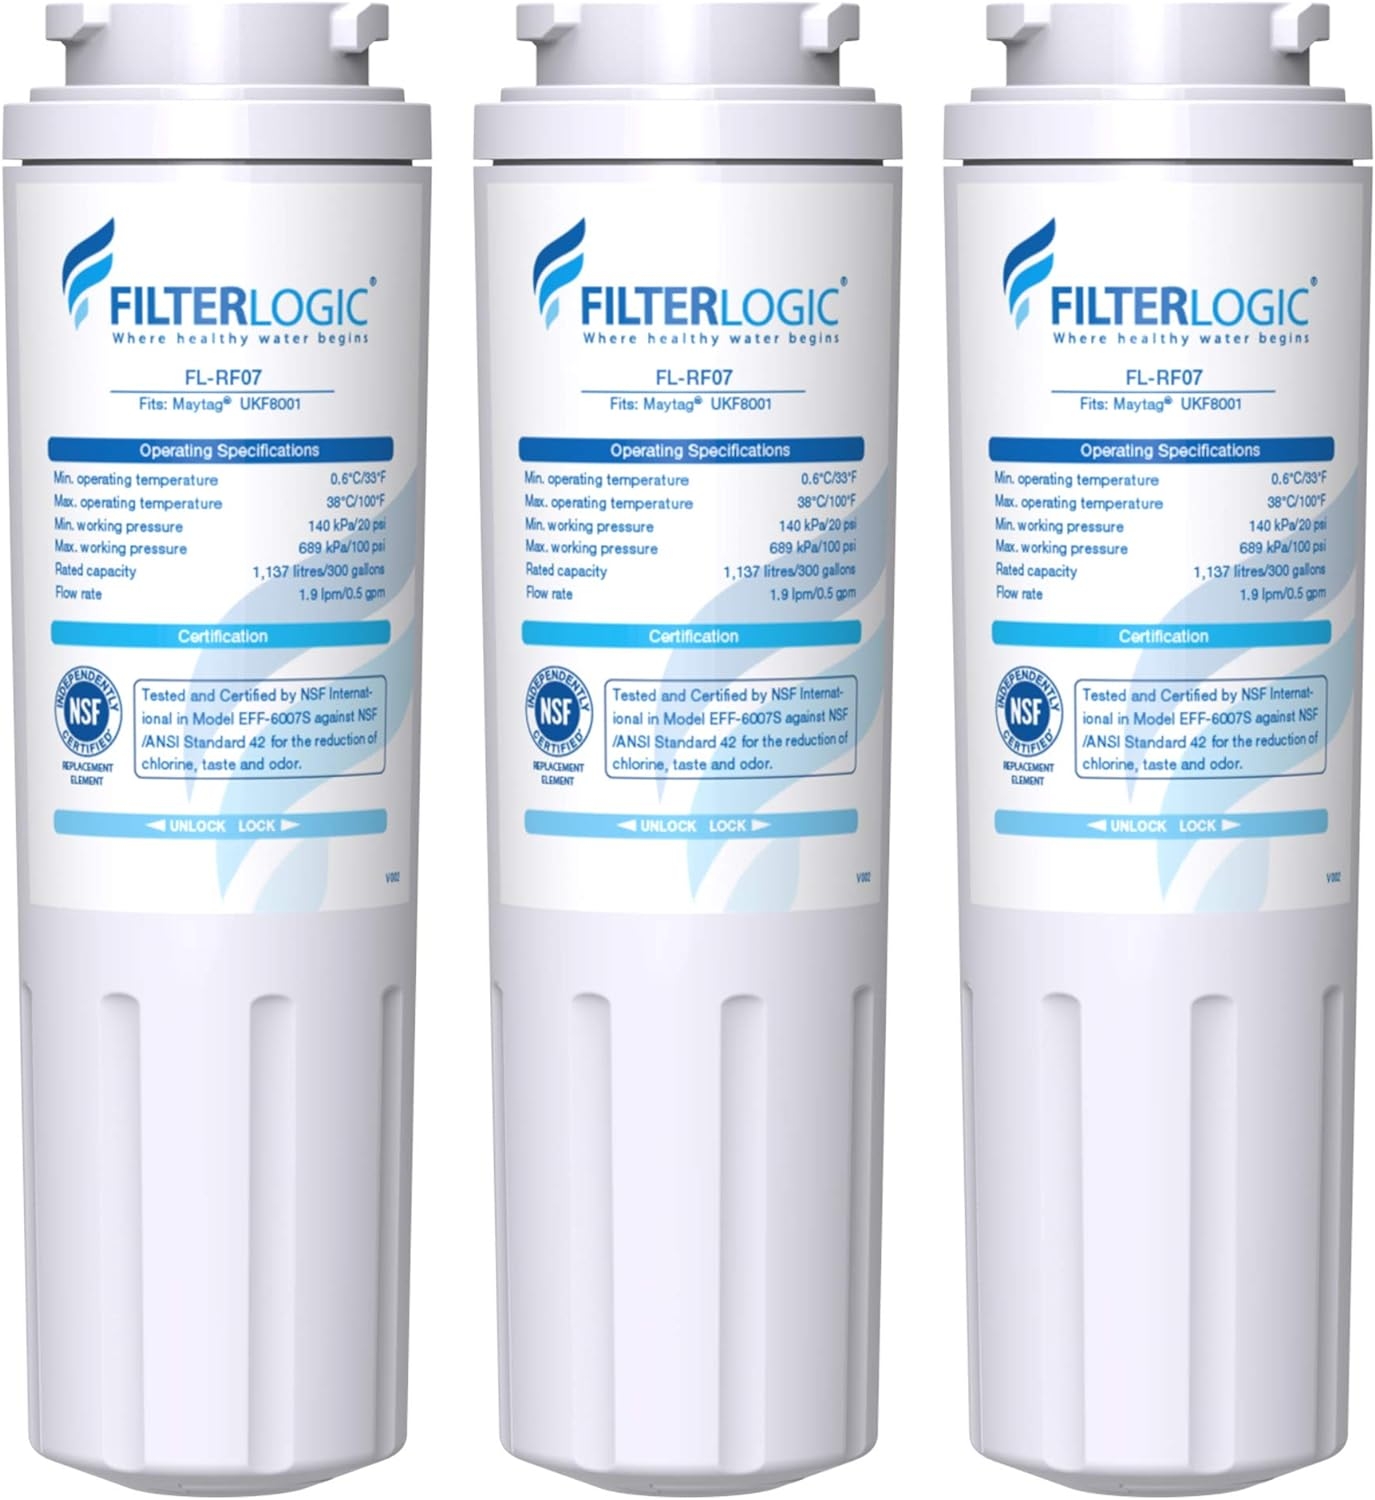 Filterlogic UKF8001 Water Filter, Replacement for EveryDrop Filter 4, EDR4RXD1, Maytag UKF8001P, UKF8001AXX, Whirlpool 4396395, 469006, FMM-2, PUR, Puriclean II (Pack of 3)